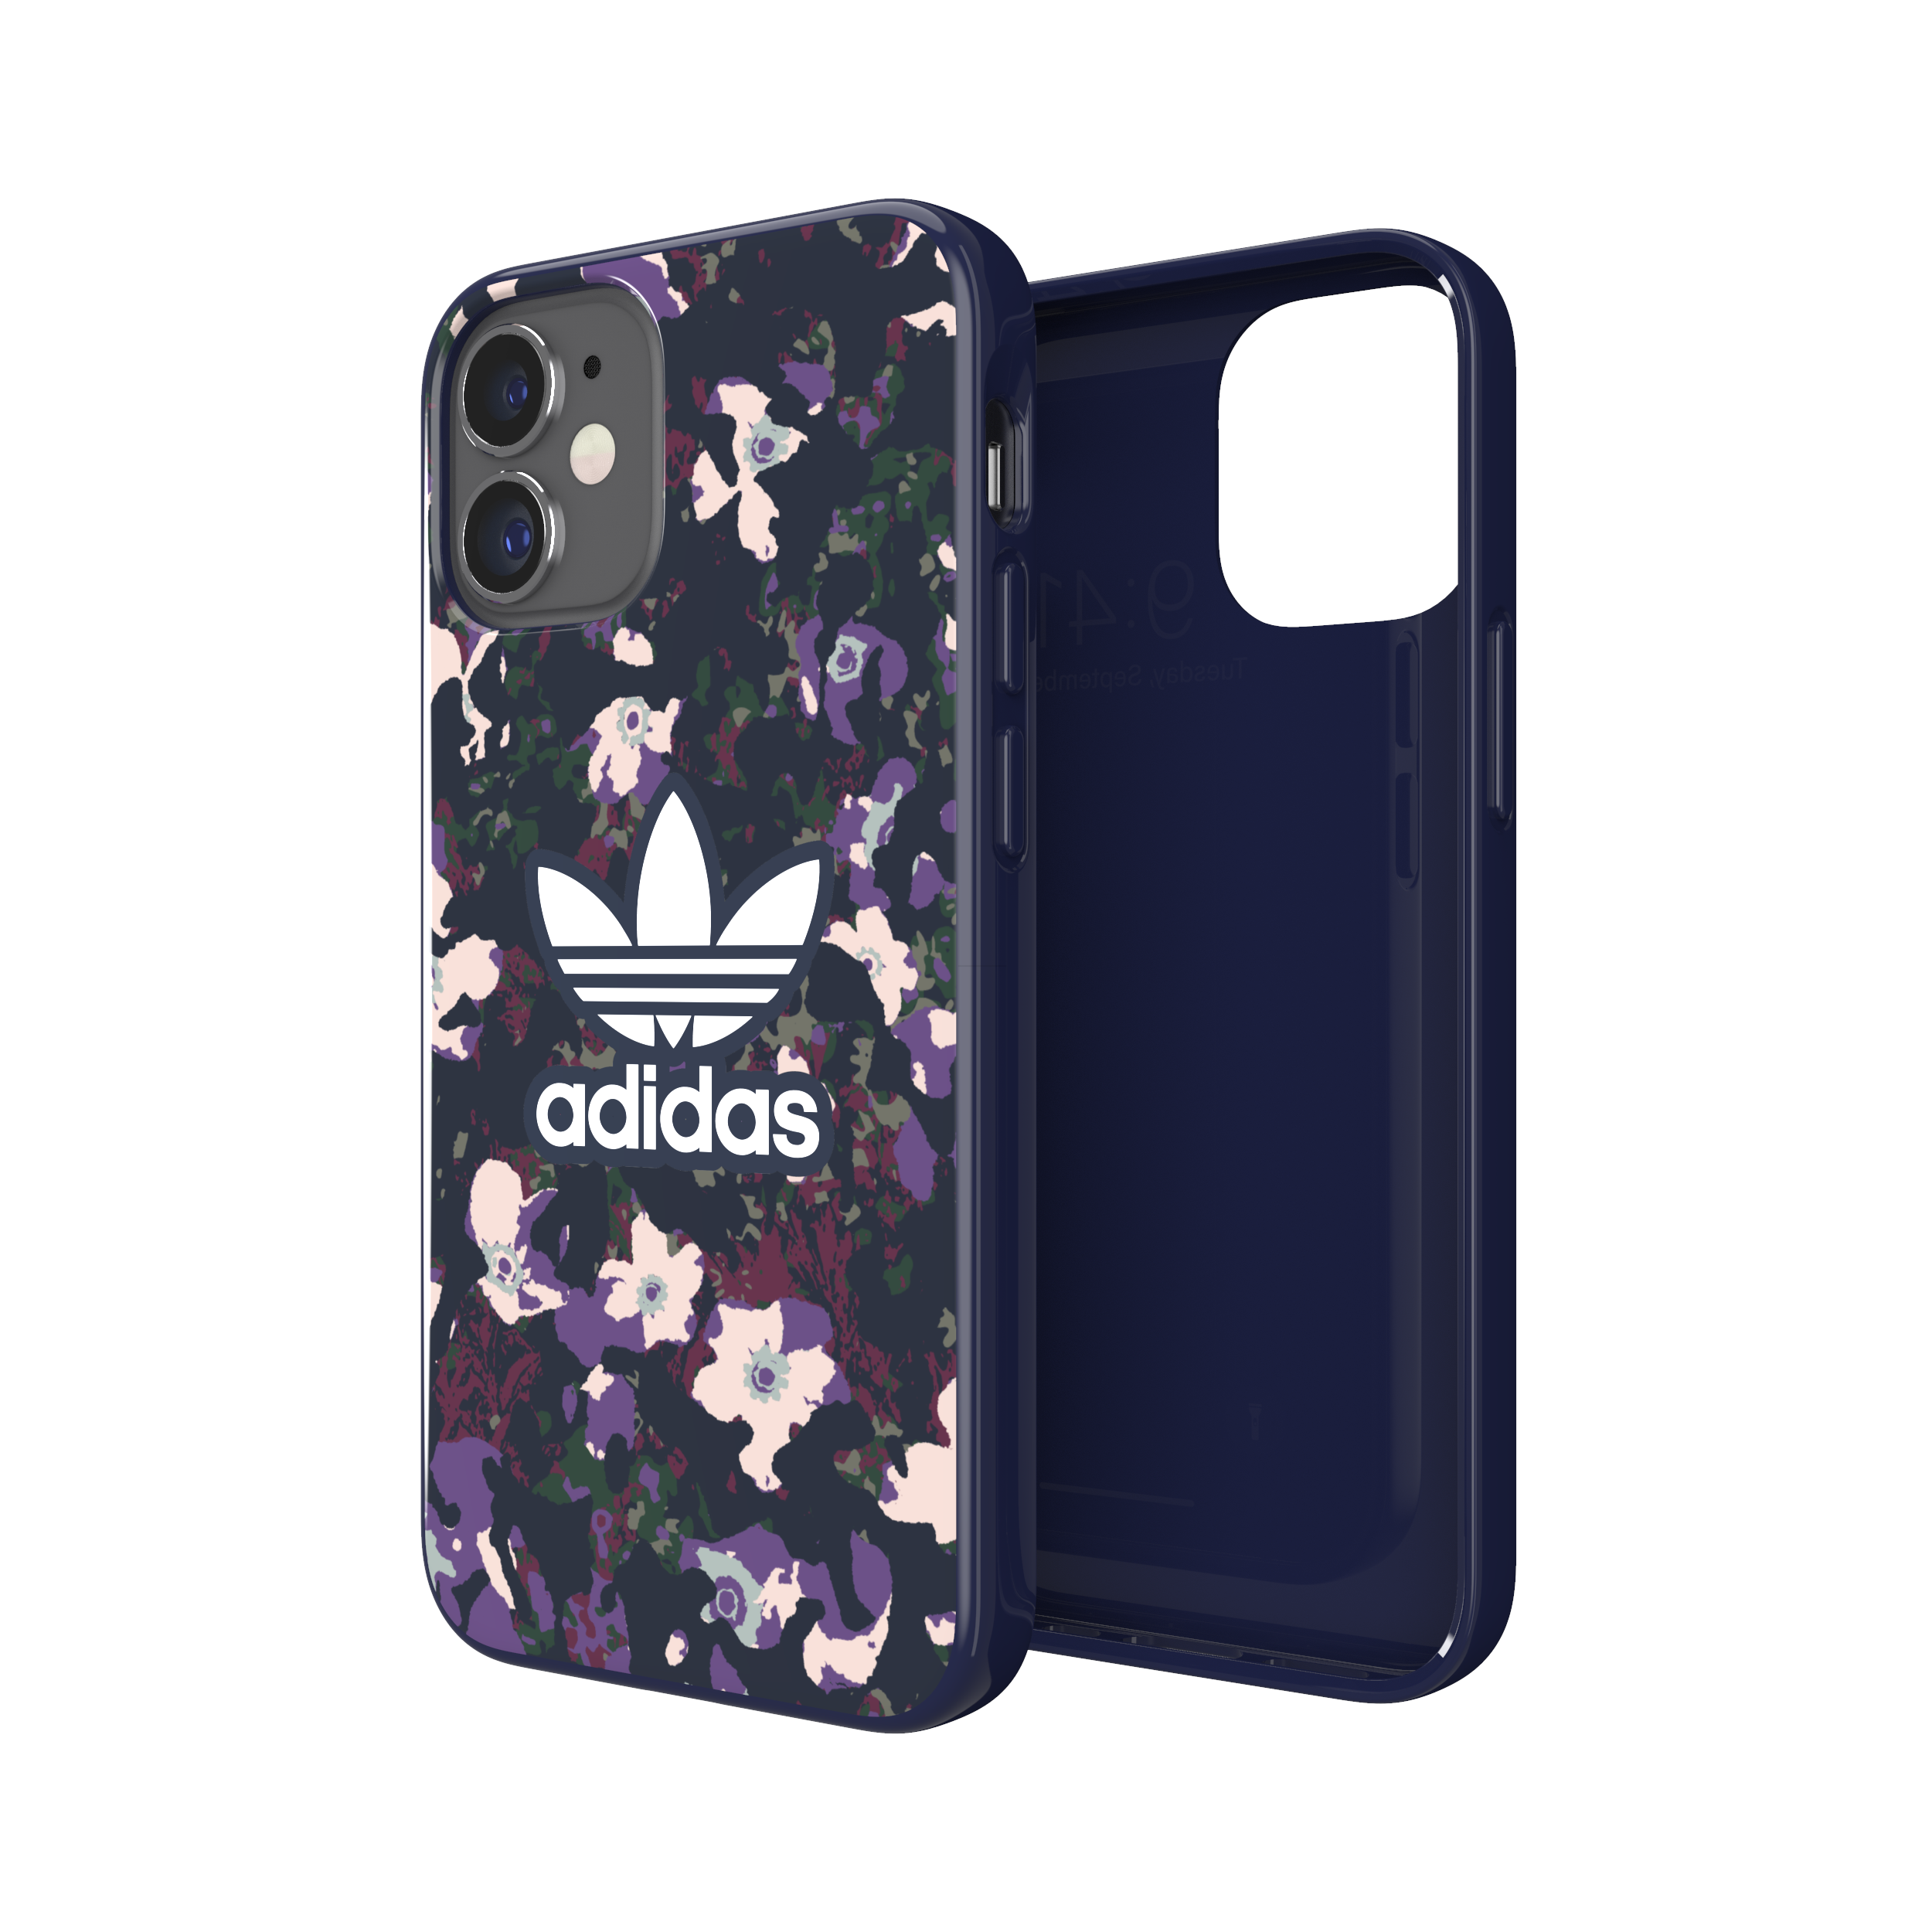 adidas SNAP Apple iPhone 12 Mini Graphic Case - Back cover w/ Trefoil Design, Scratch & Drop Protection w/ TPU Bumper, Wireless Charging Compatible - Navy/Active Puple